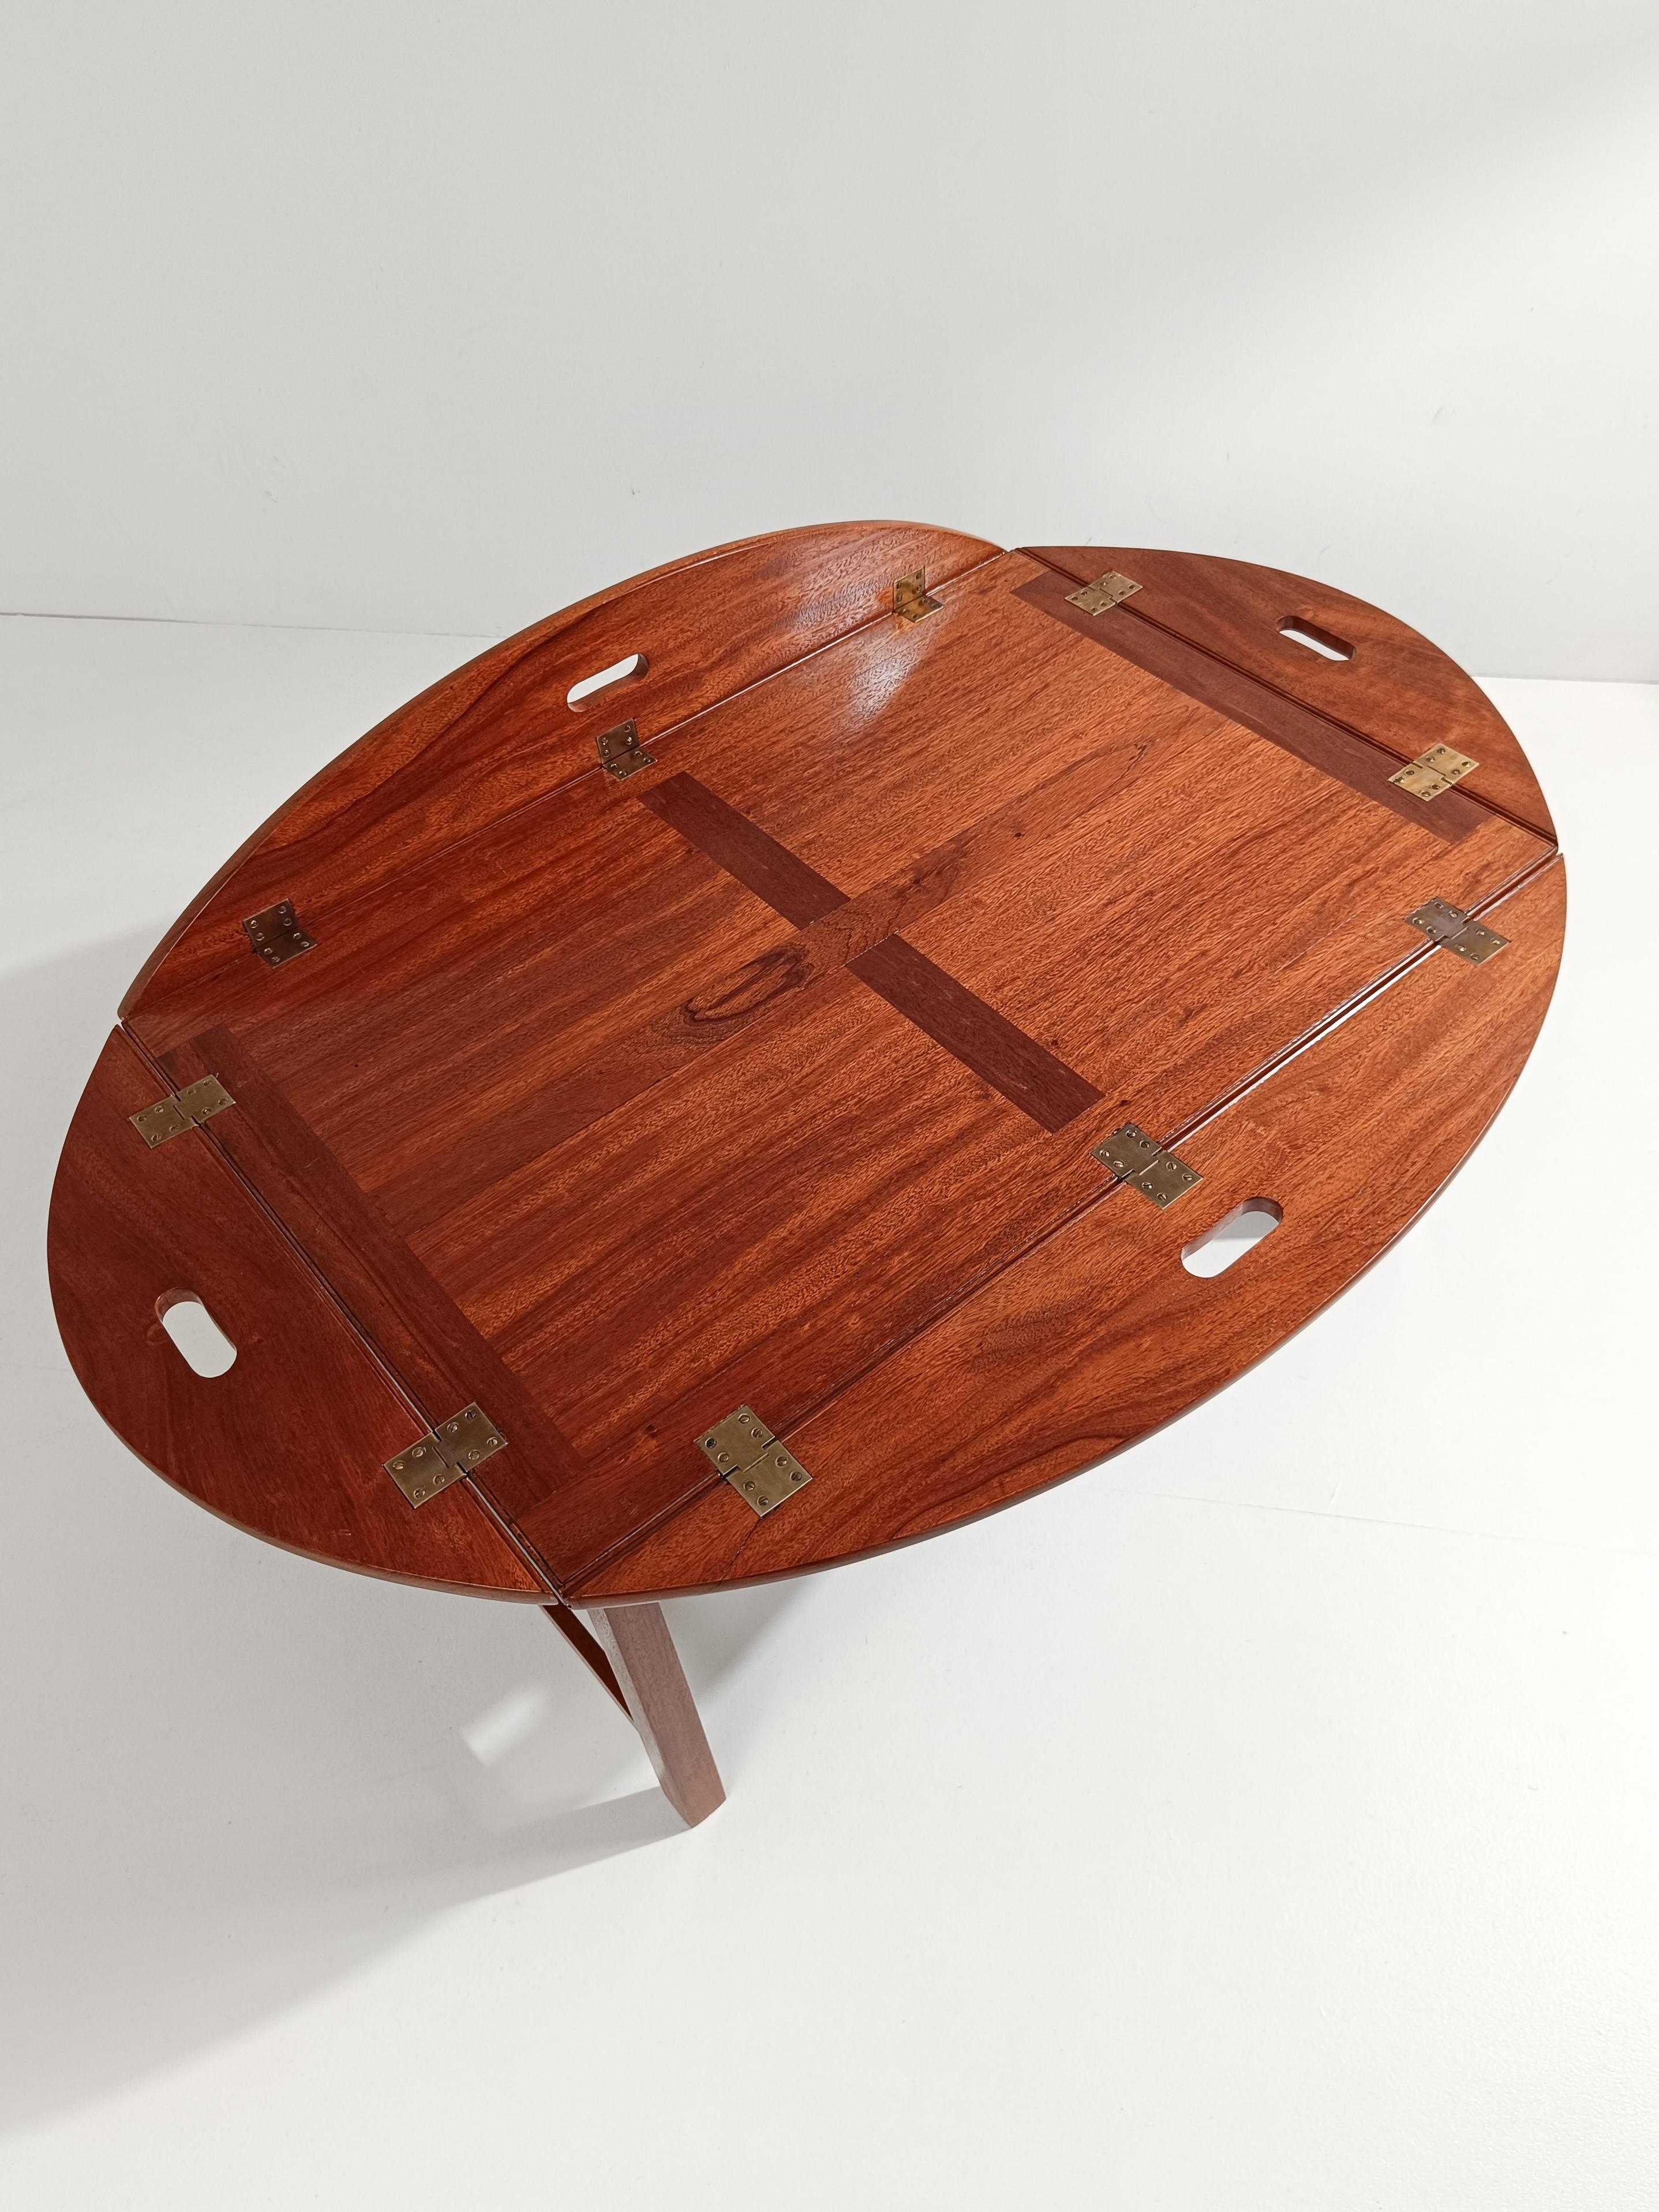 Vintage Oval Mahogany Butler's Coffee Tray Table in Georgian-style, Circa 1960s For Sale 13